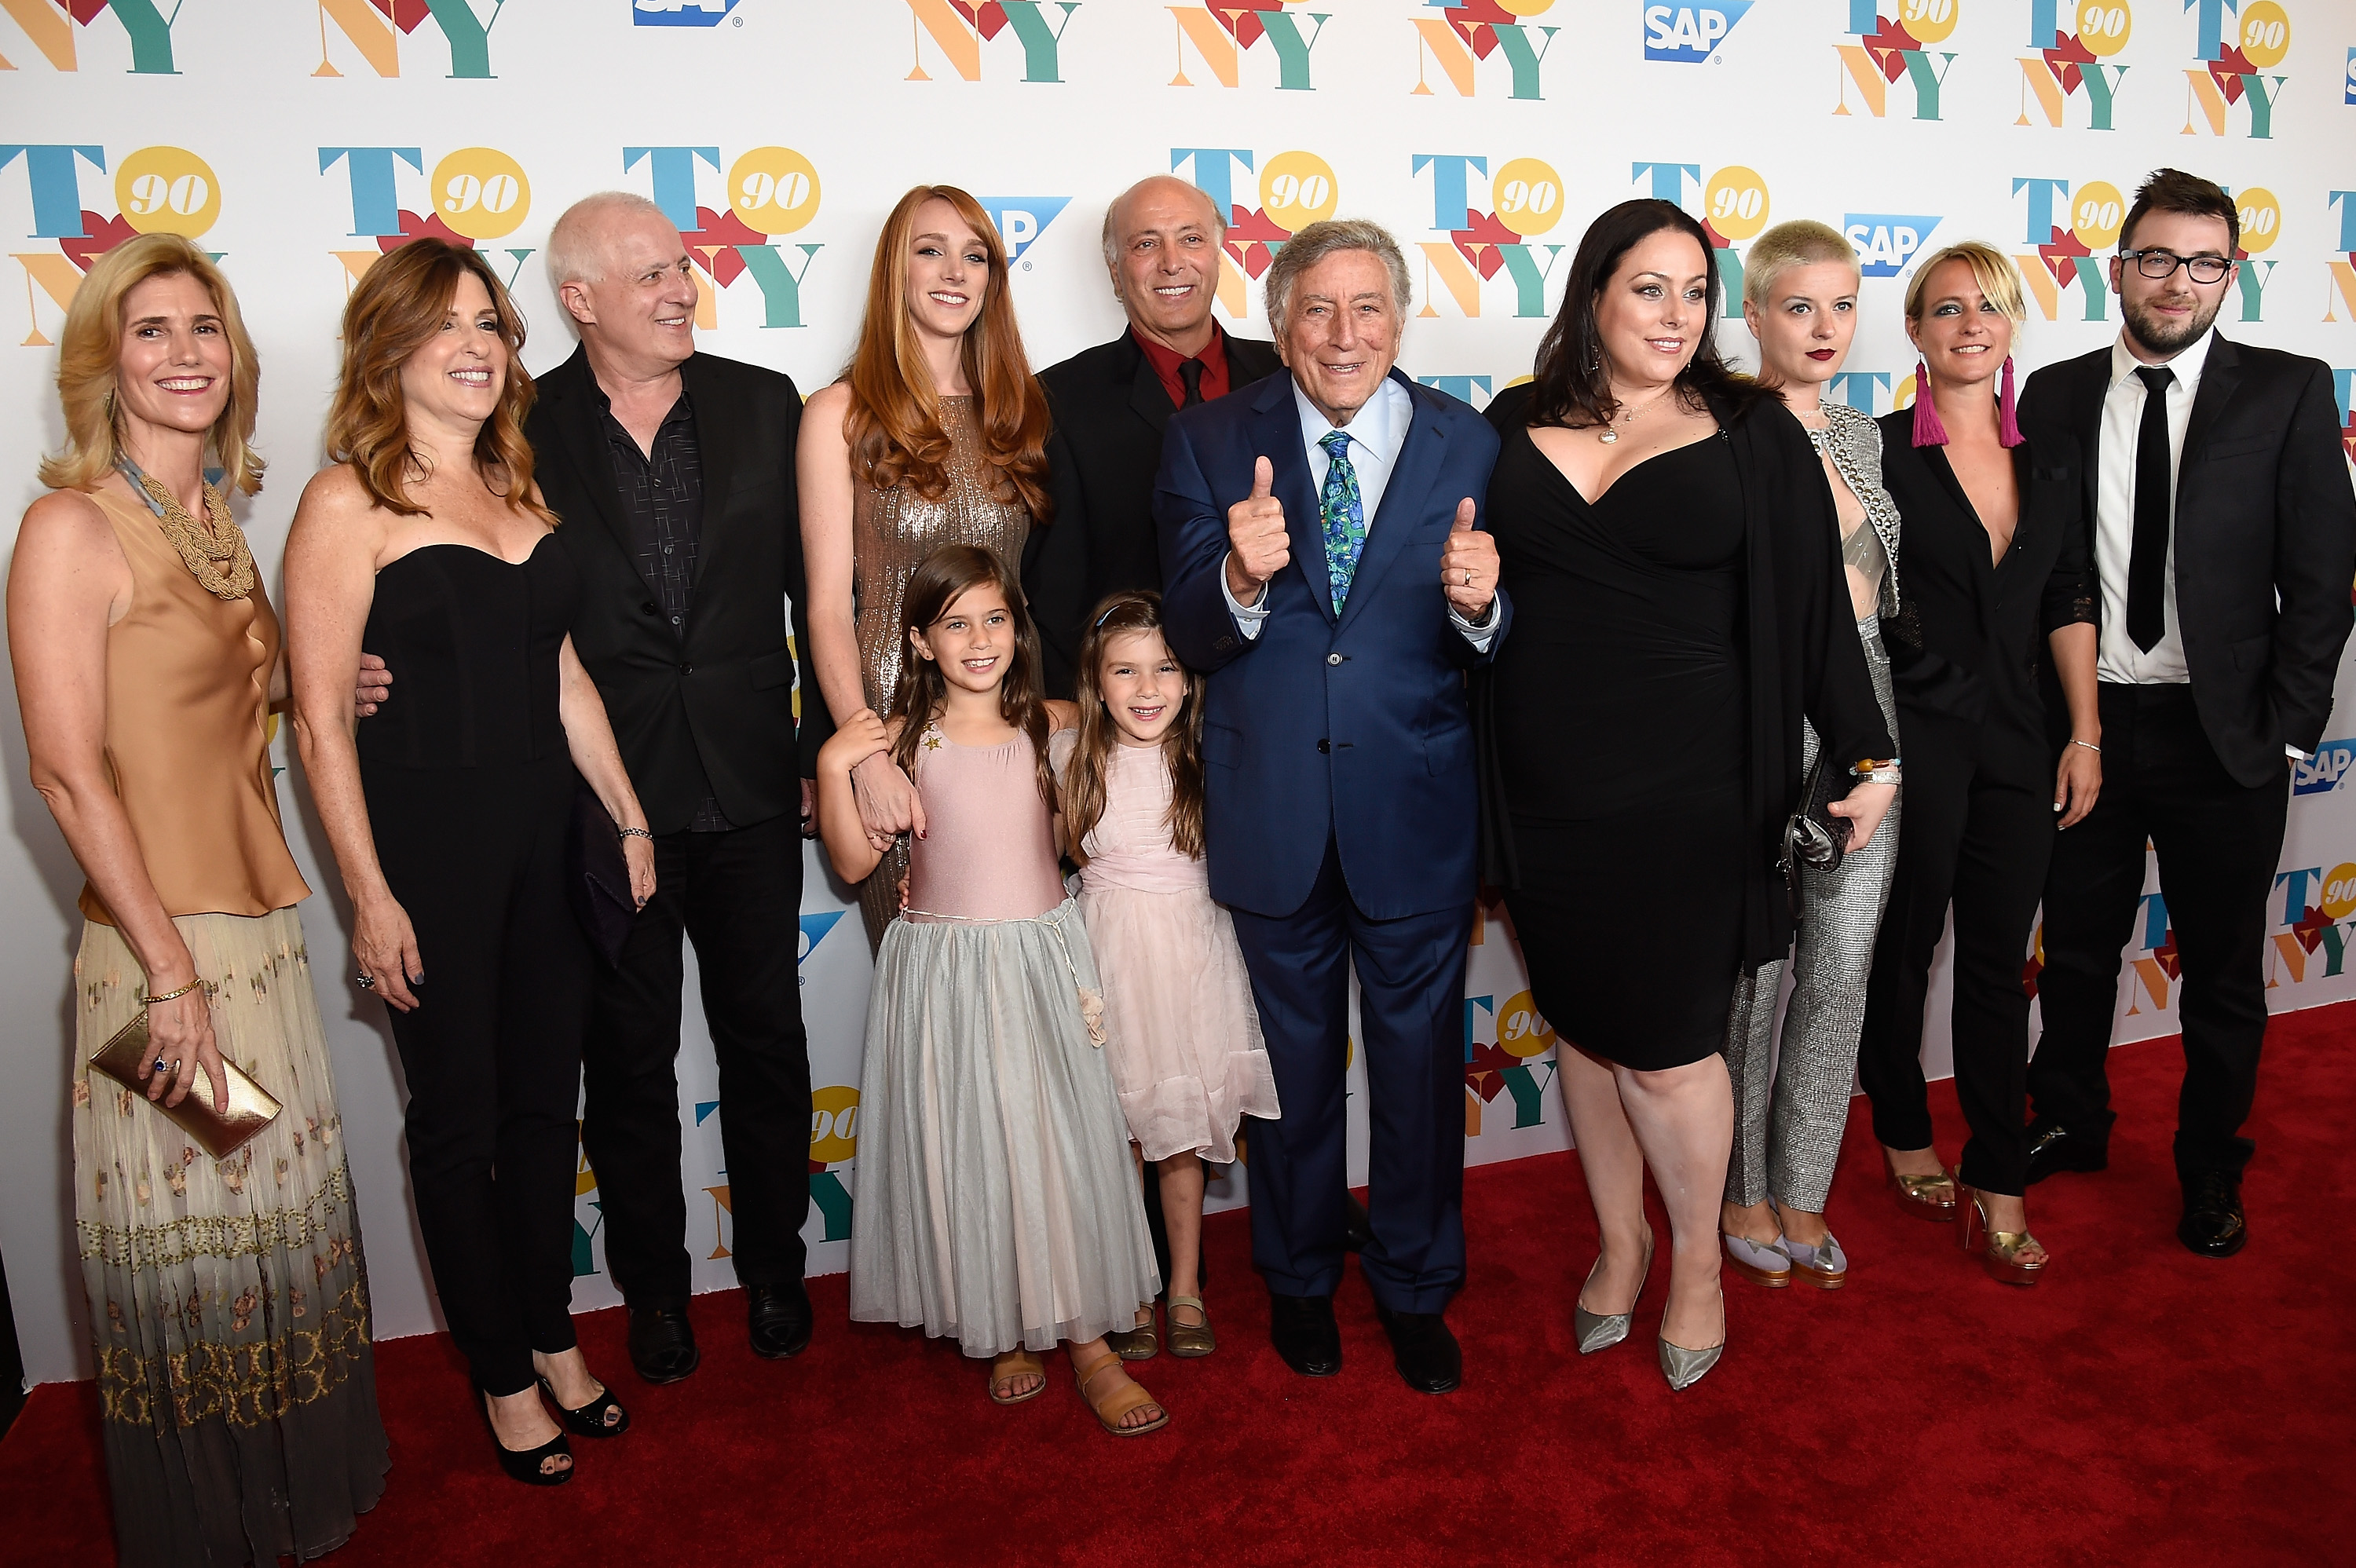 Tony Bennett with his wife Sandra Grant Bennett and their family at his 90th birthday celebration in New York City, 2016 | Source: Getty Images